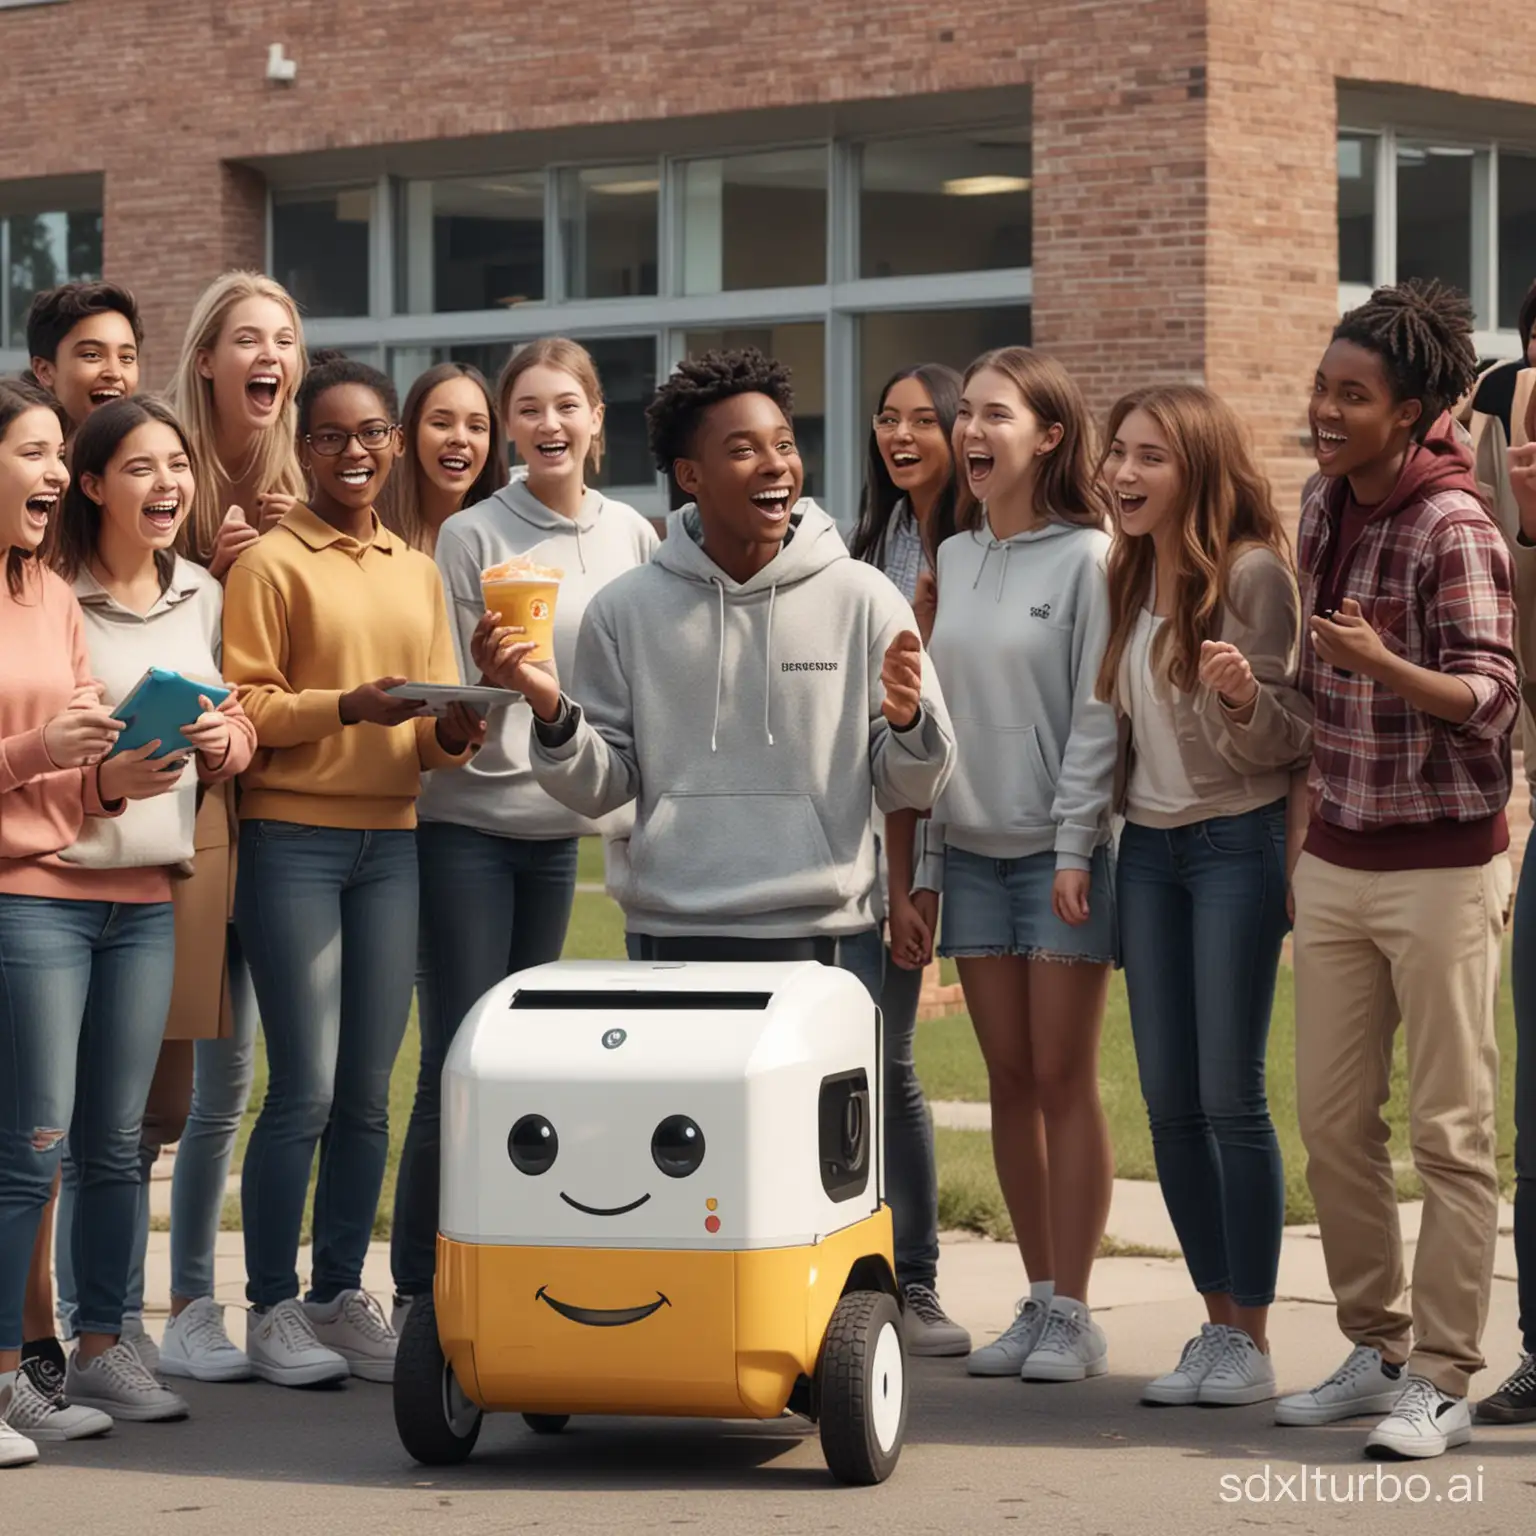 a diverse group of students outside the high school are surprised and excited about a food delivery robot with a smiley face. Magical realism style.